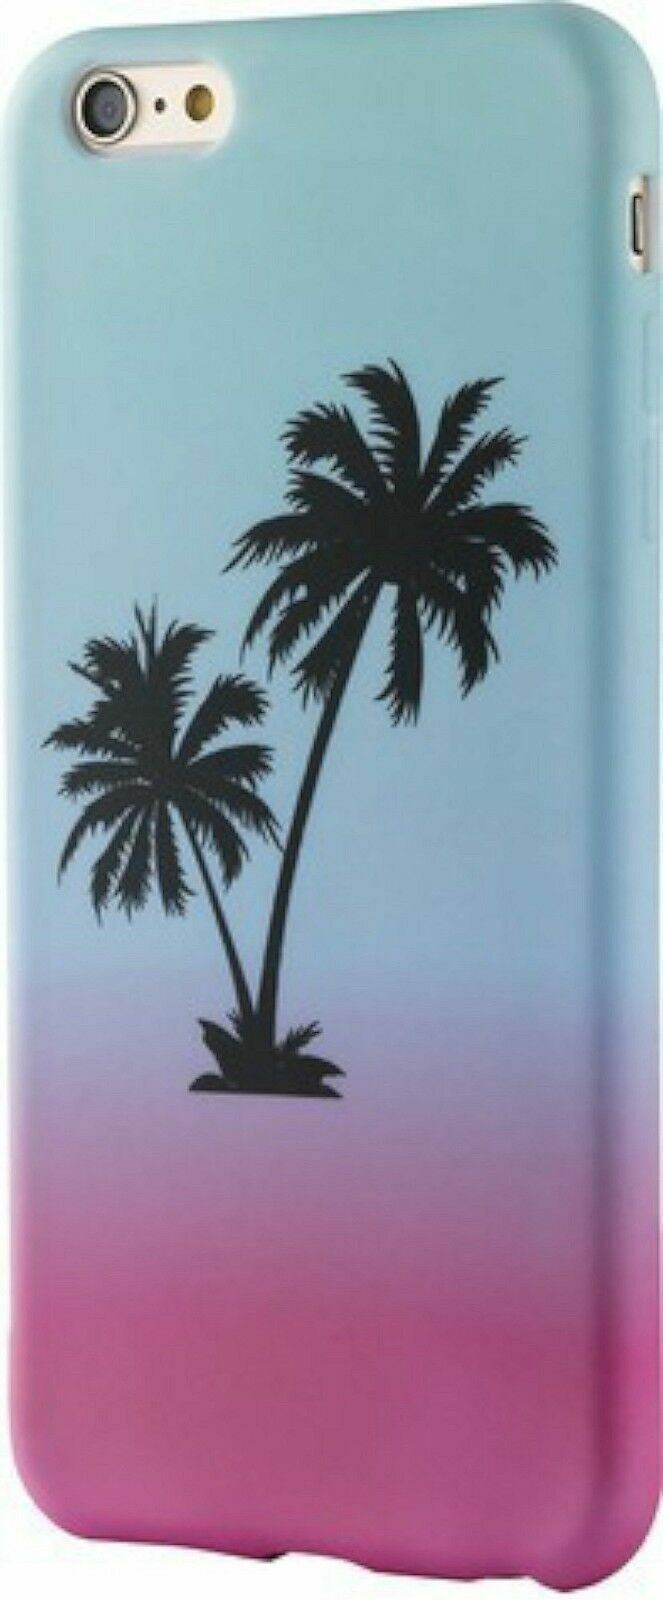 Primary image for NEW Dynex iPhone 6/6s Palm Trees BLUE/PINK Cell Phone Case Soft Shell DX-MA6S8PT